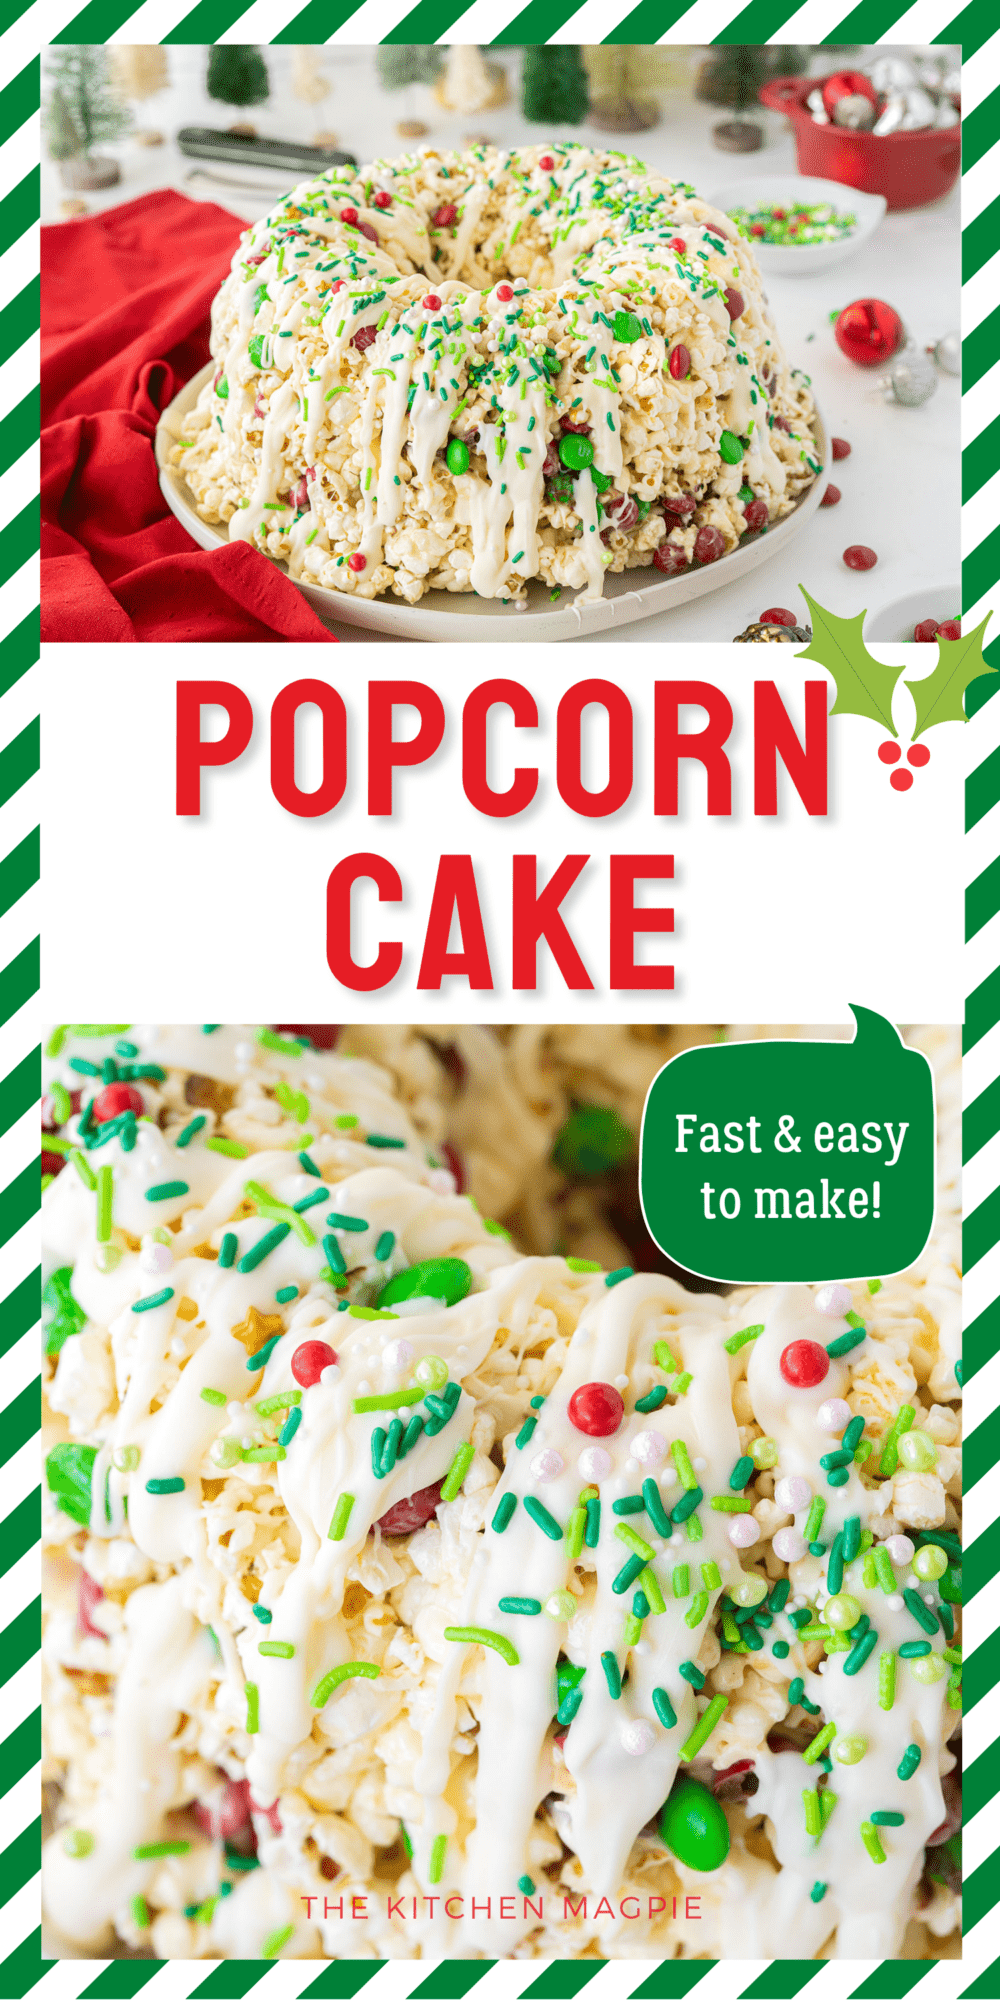 Crunchy, sweet and easy to make, popcorn cake is a hit with kids and adult alike! You can adjust the candies according to the occasion, from Christmas to birthday!